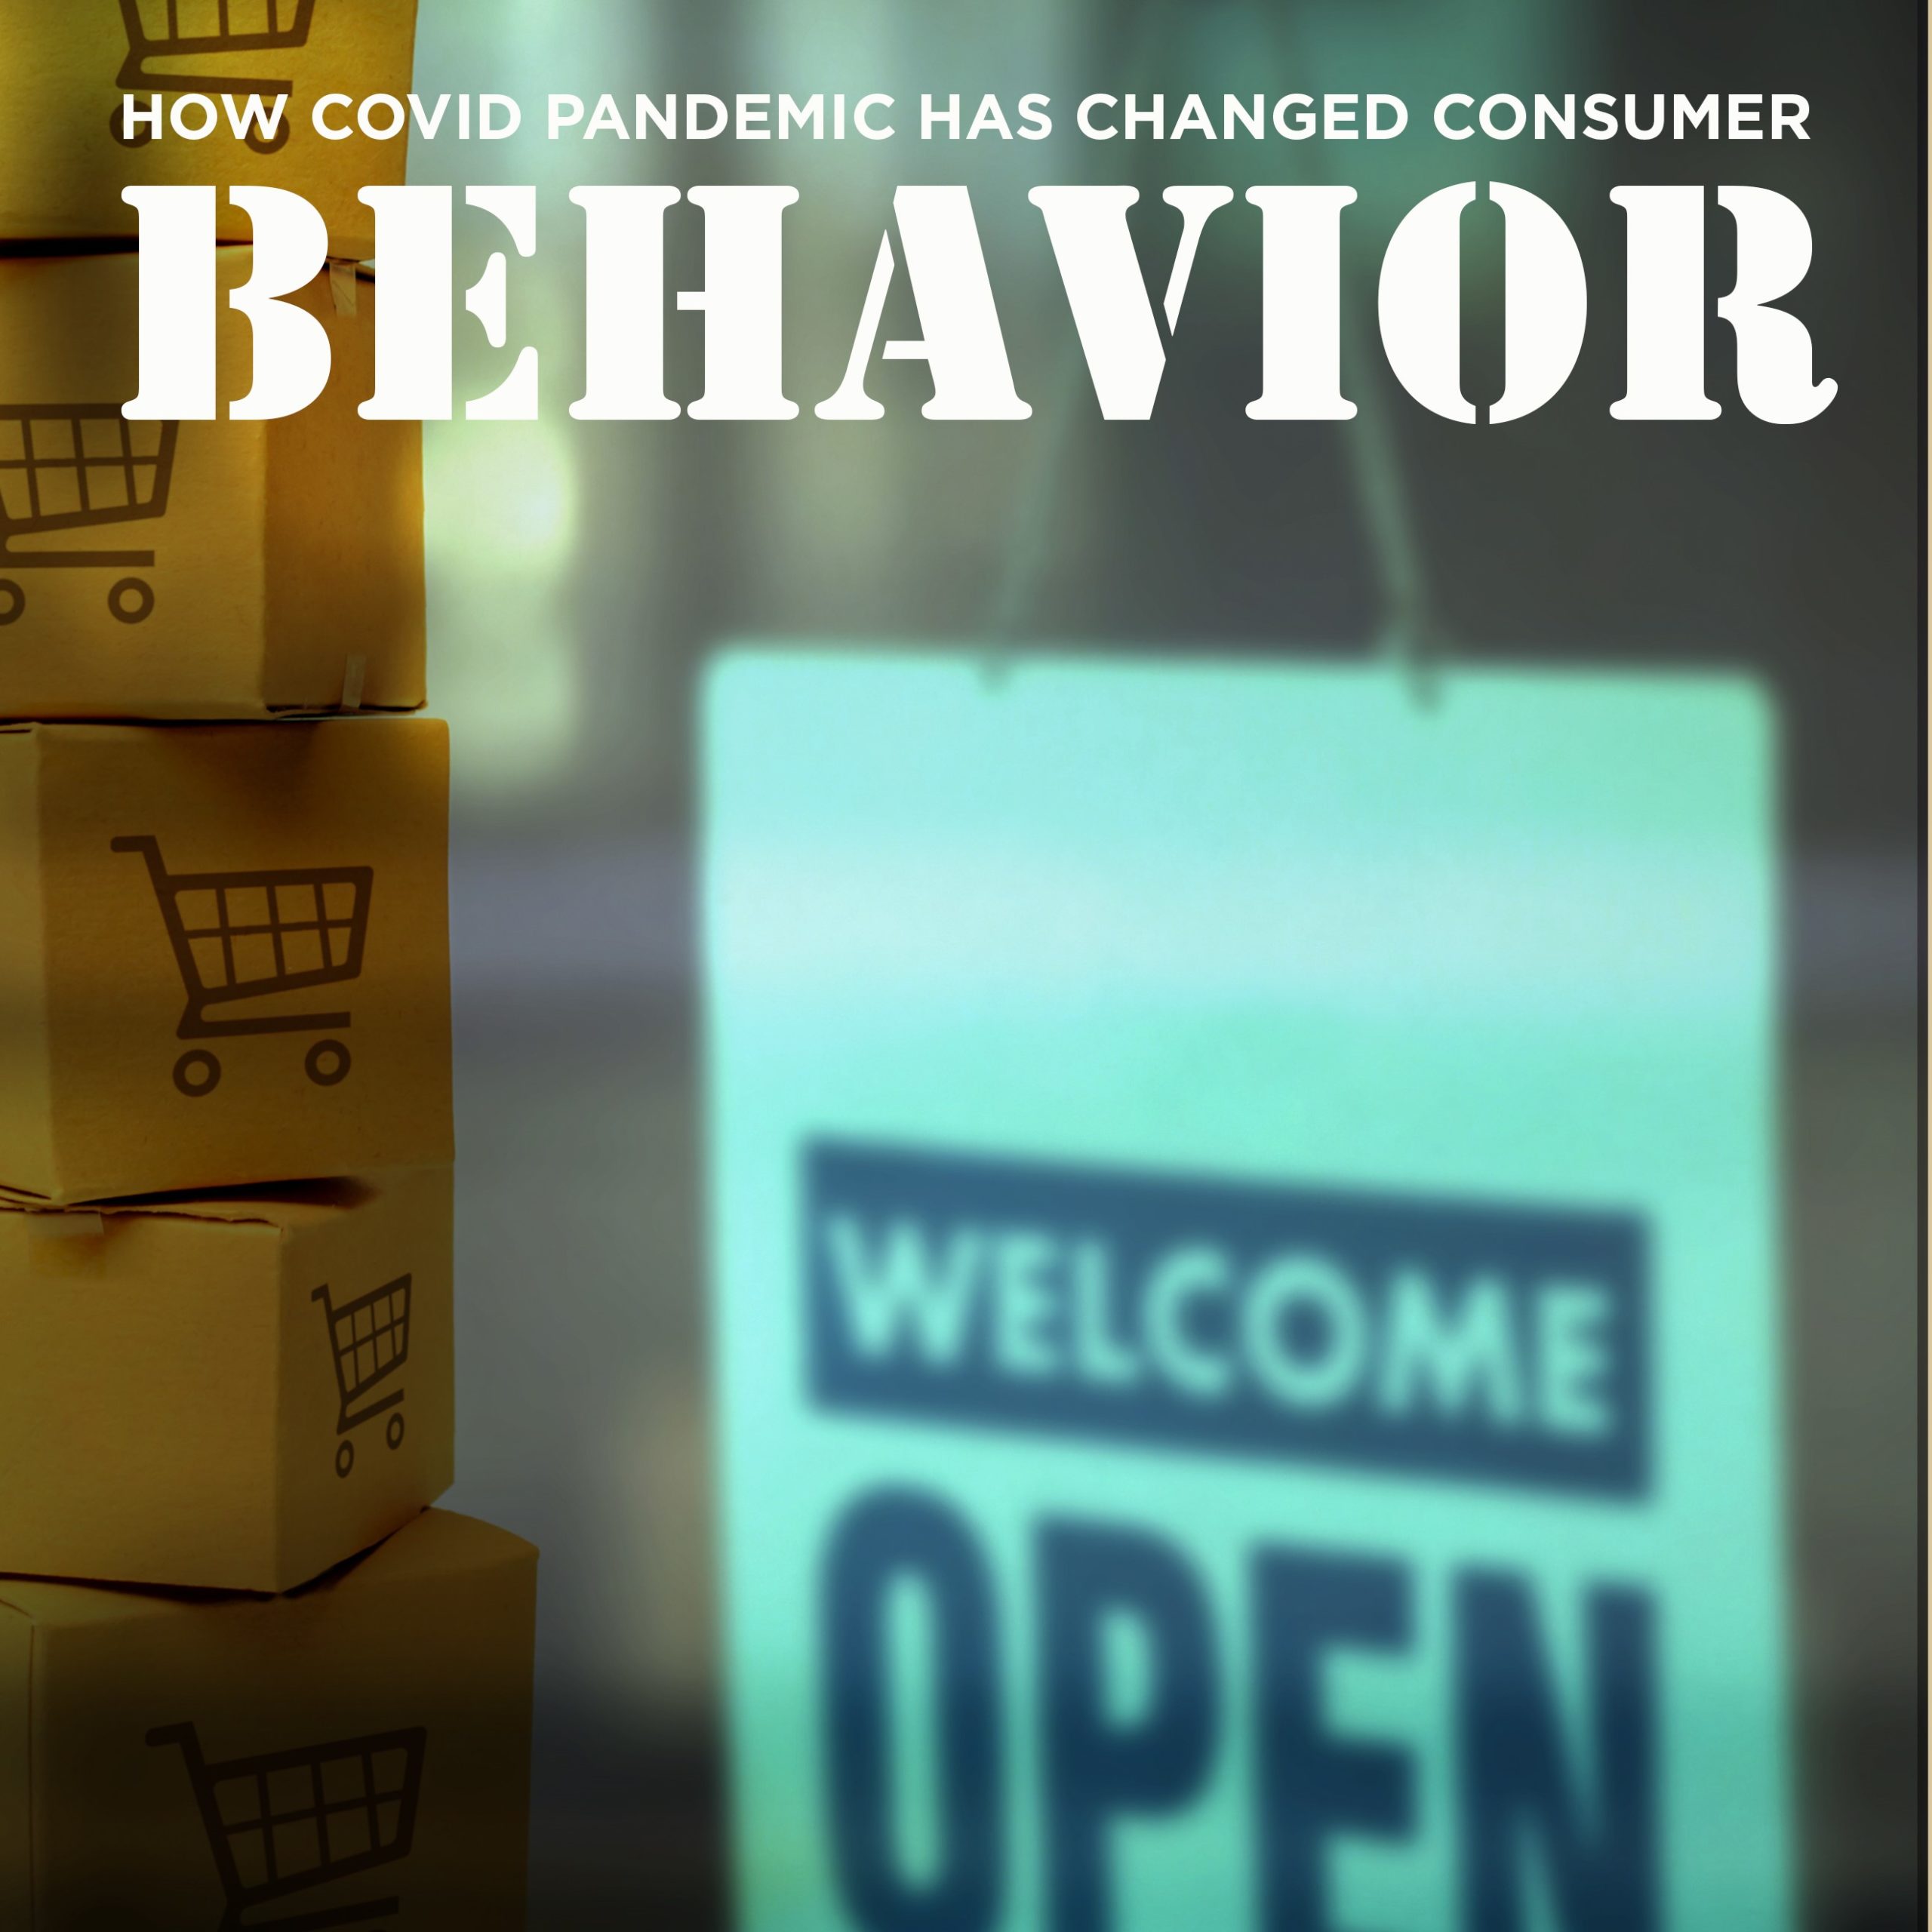 How the COVID-19 Pandemic Changed Consumer Behavior